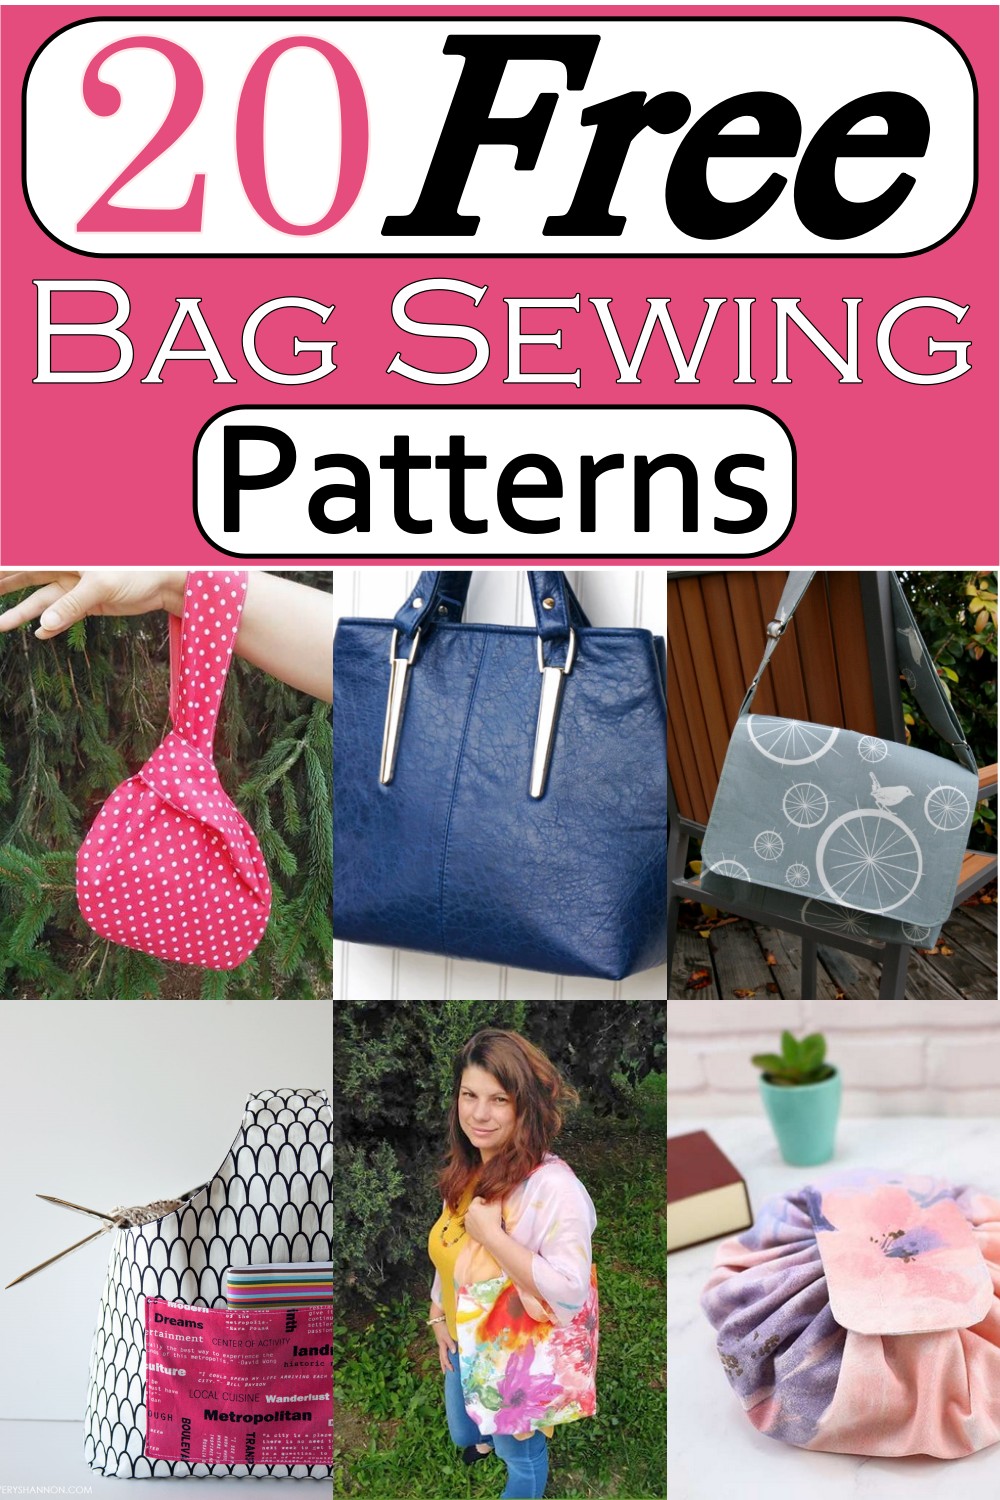 20 Free Bag Sewing Patterns For Everyone To Try - Craftsy